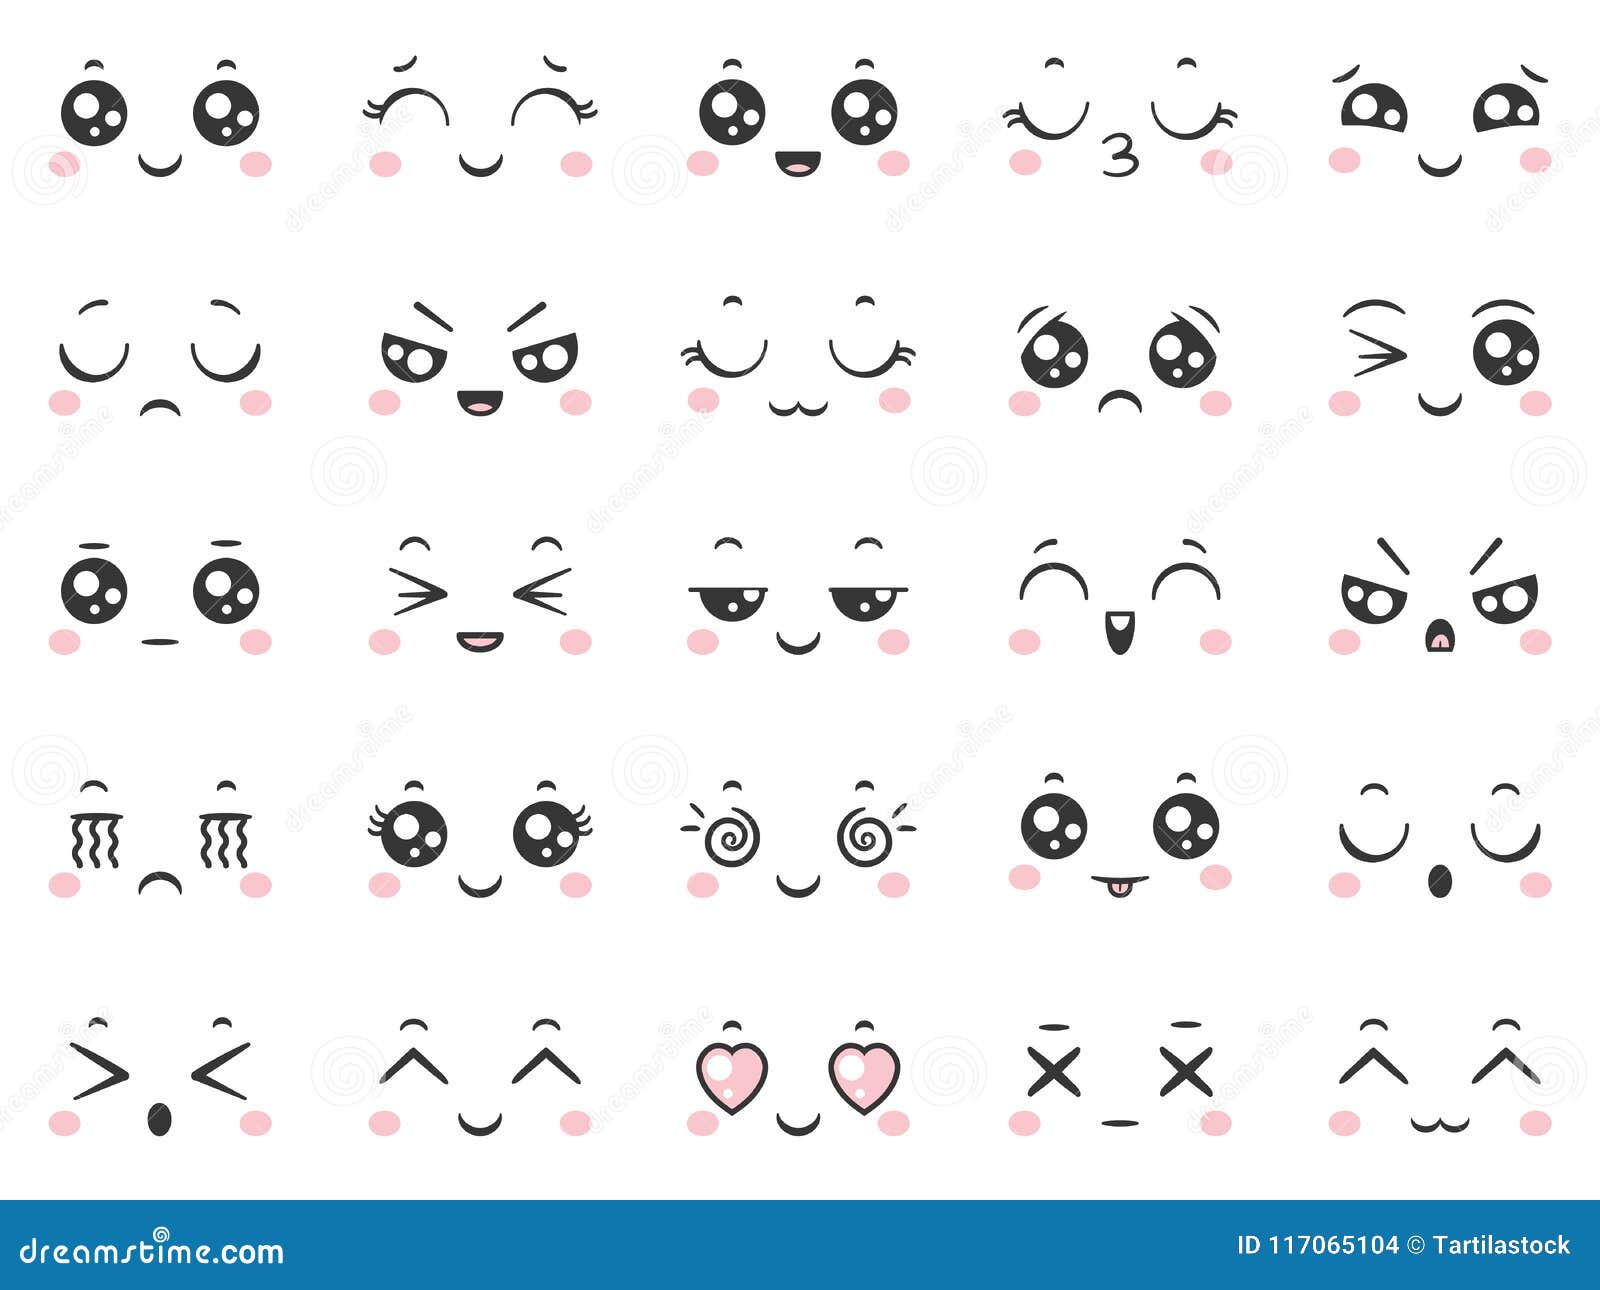 Cute Doodle Emoticons with Facial Expressions. Japanese Anime Style Emotion  Faces and Kawaii Emoji Icons Vector Set Stock Vector - Illustration of  happy, humor: 117065104